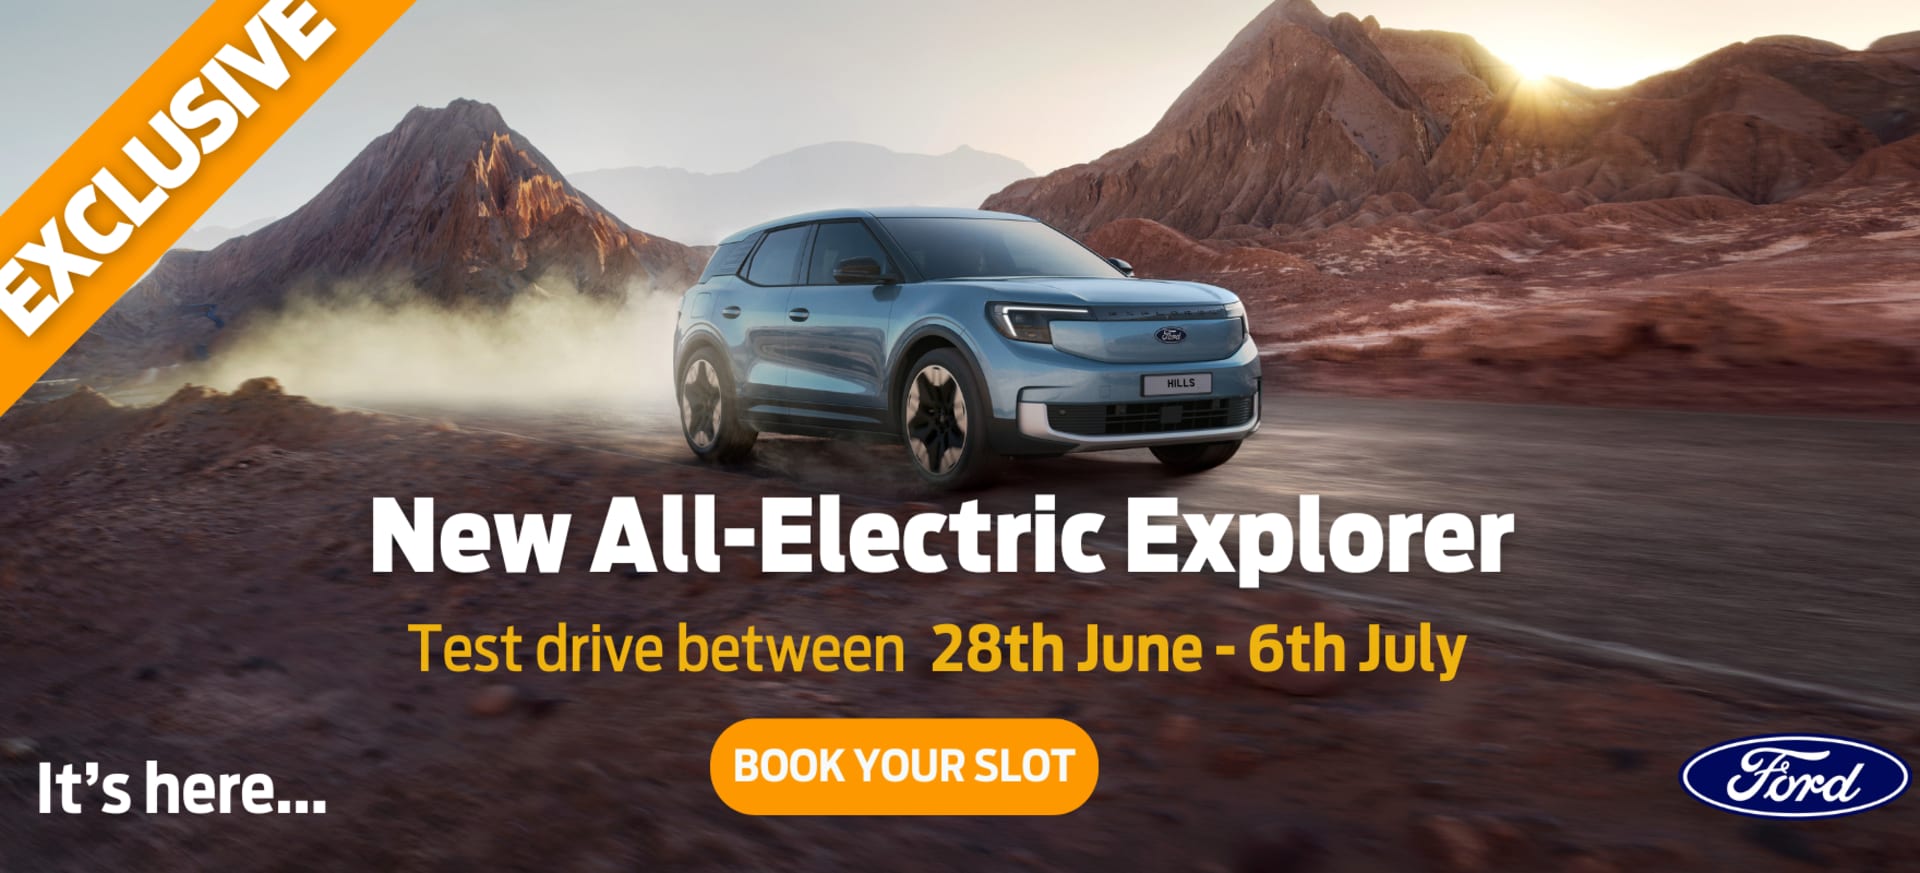 All-New Electric Explorer